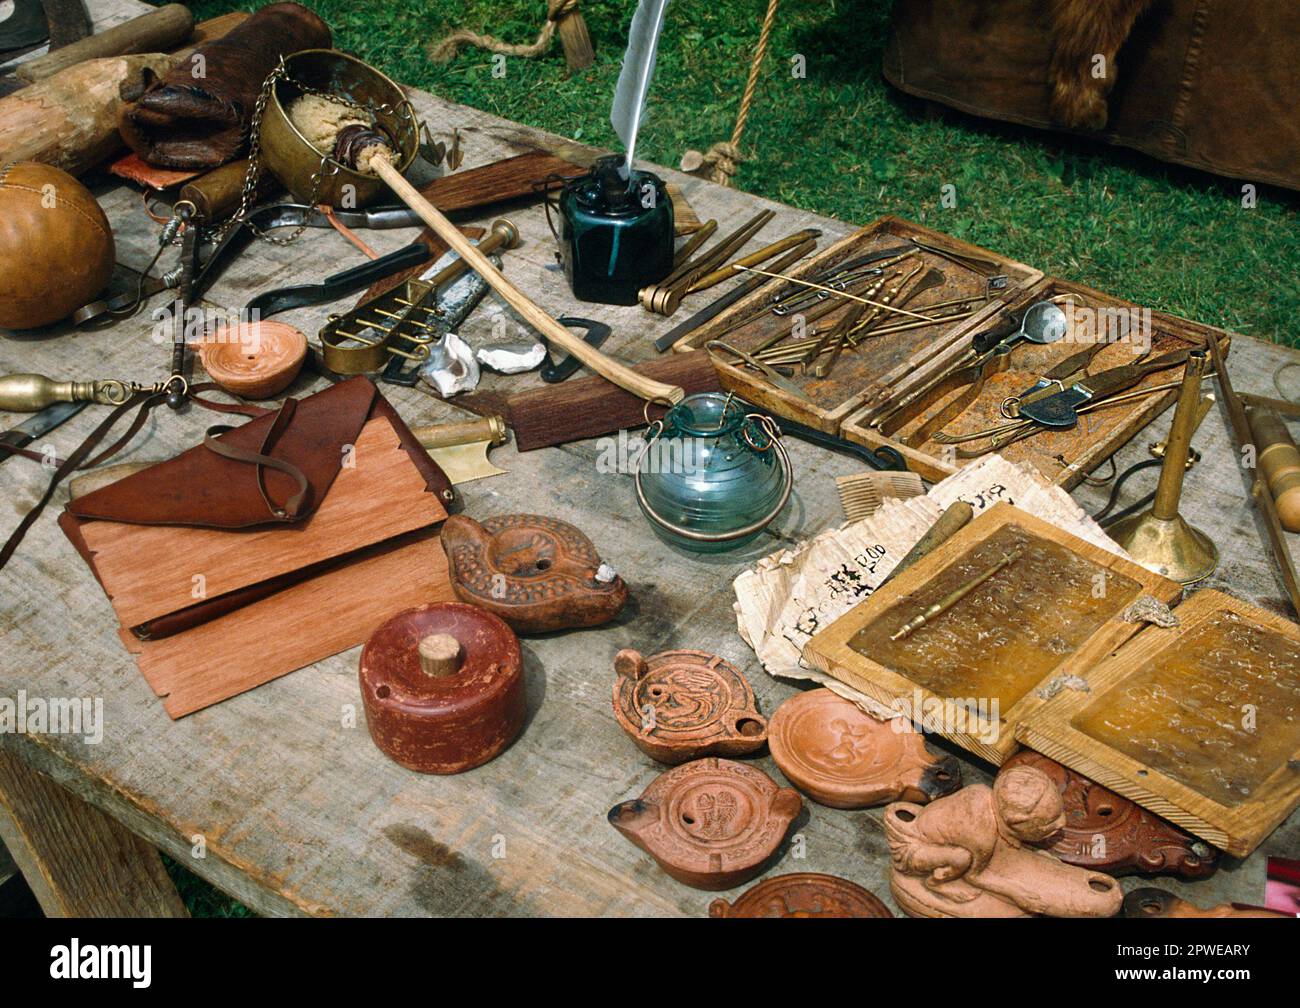 Ermine Street Guard Roman display. Items of everyday life; wax writing tablets, medical kit, oil lamps, stridgle. Stock Photo